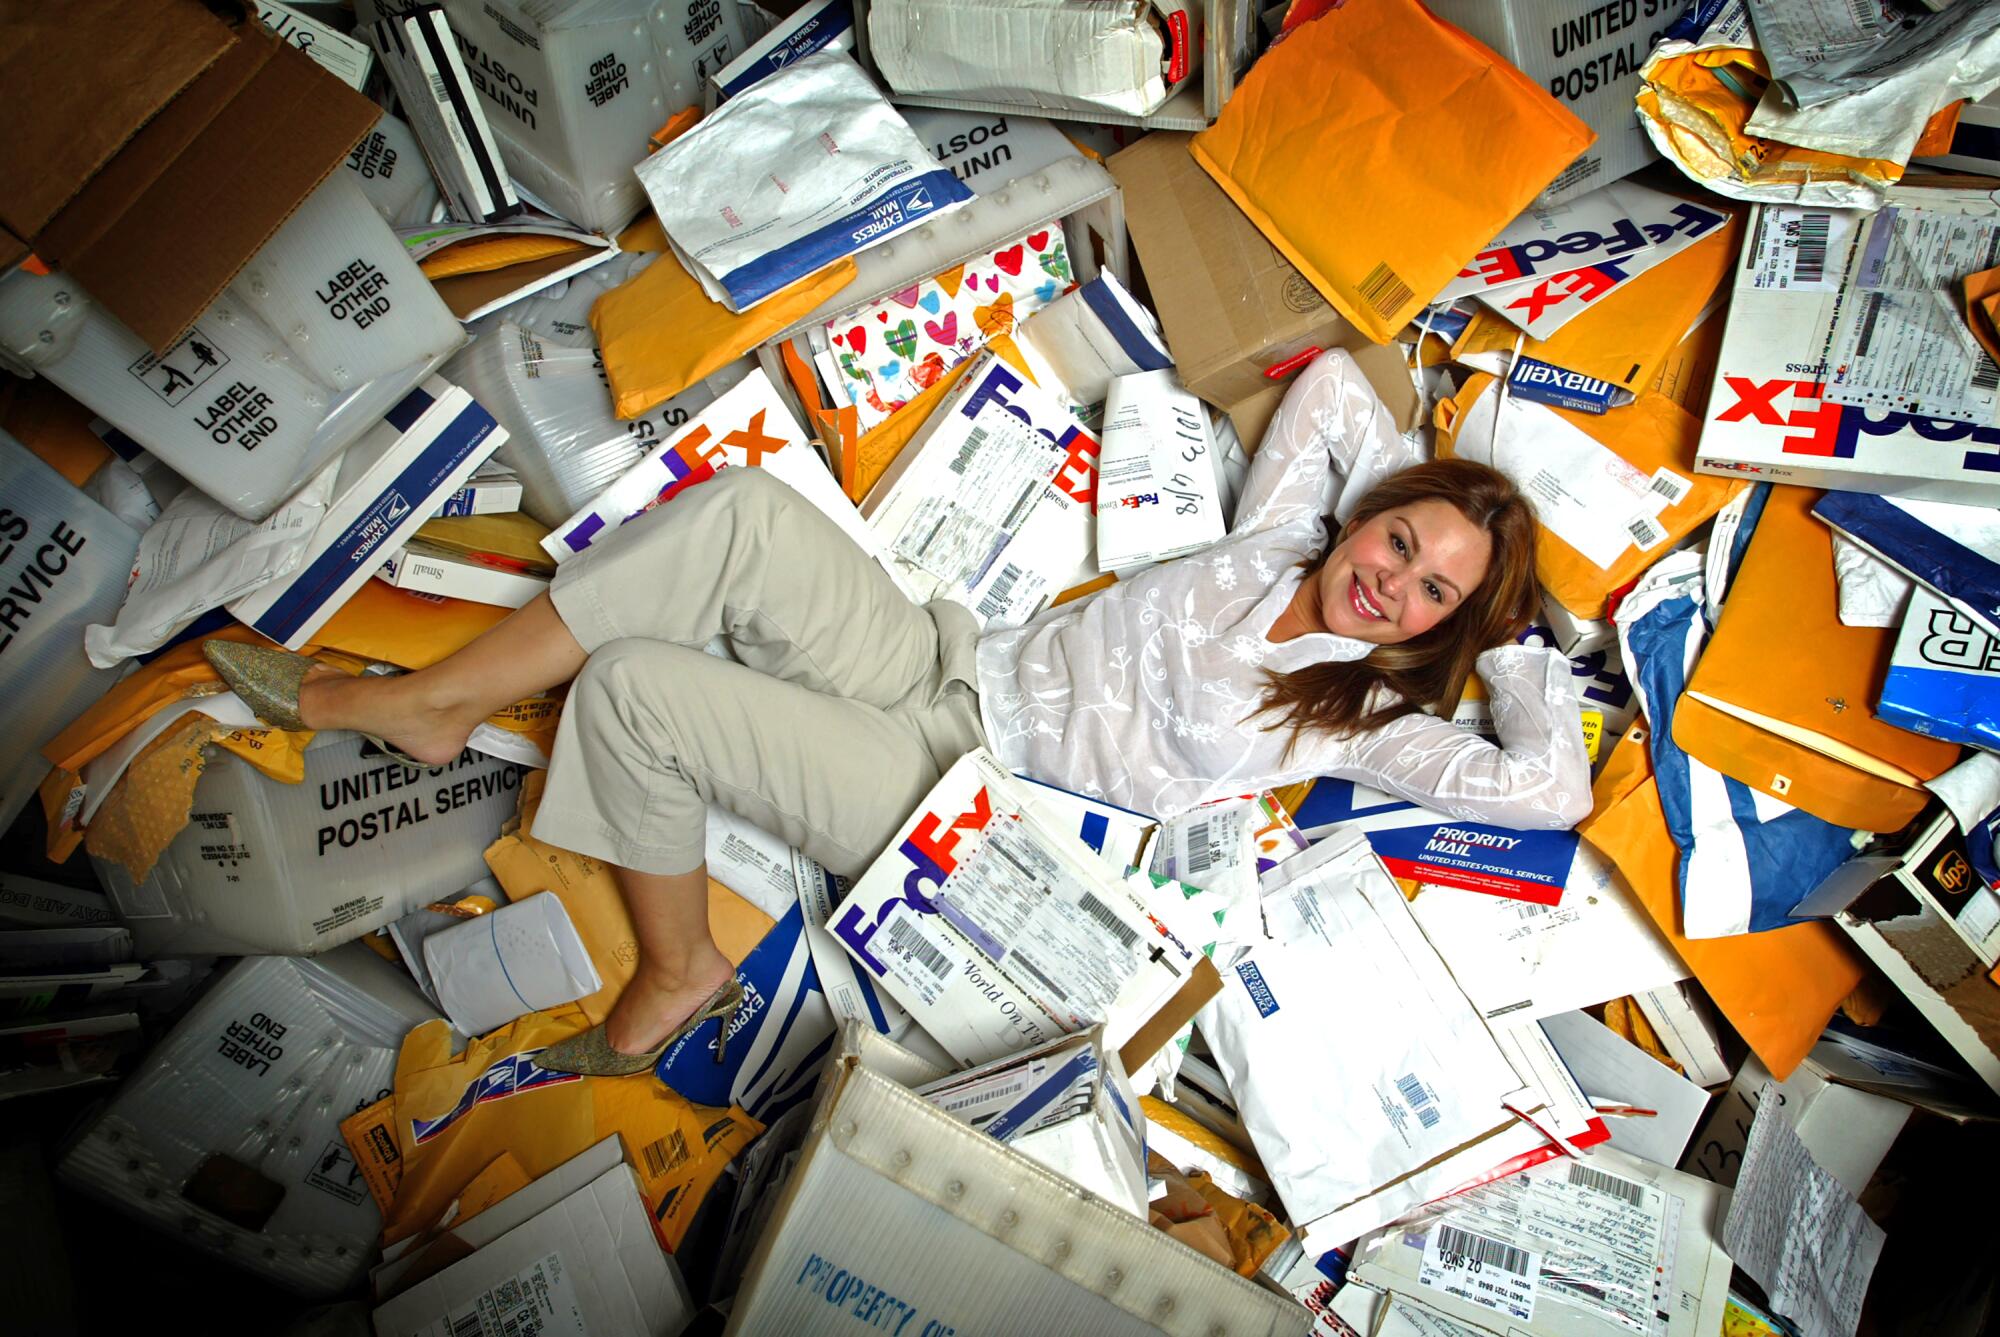 Nely Galán on top of dozens of packages and envelopes strewn on the floor.